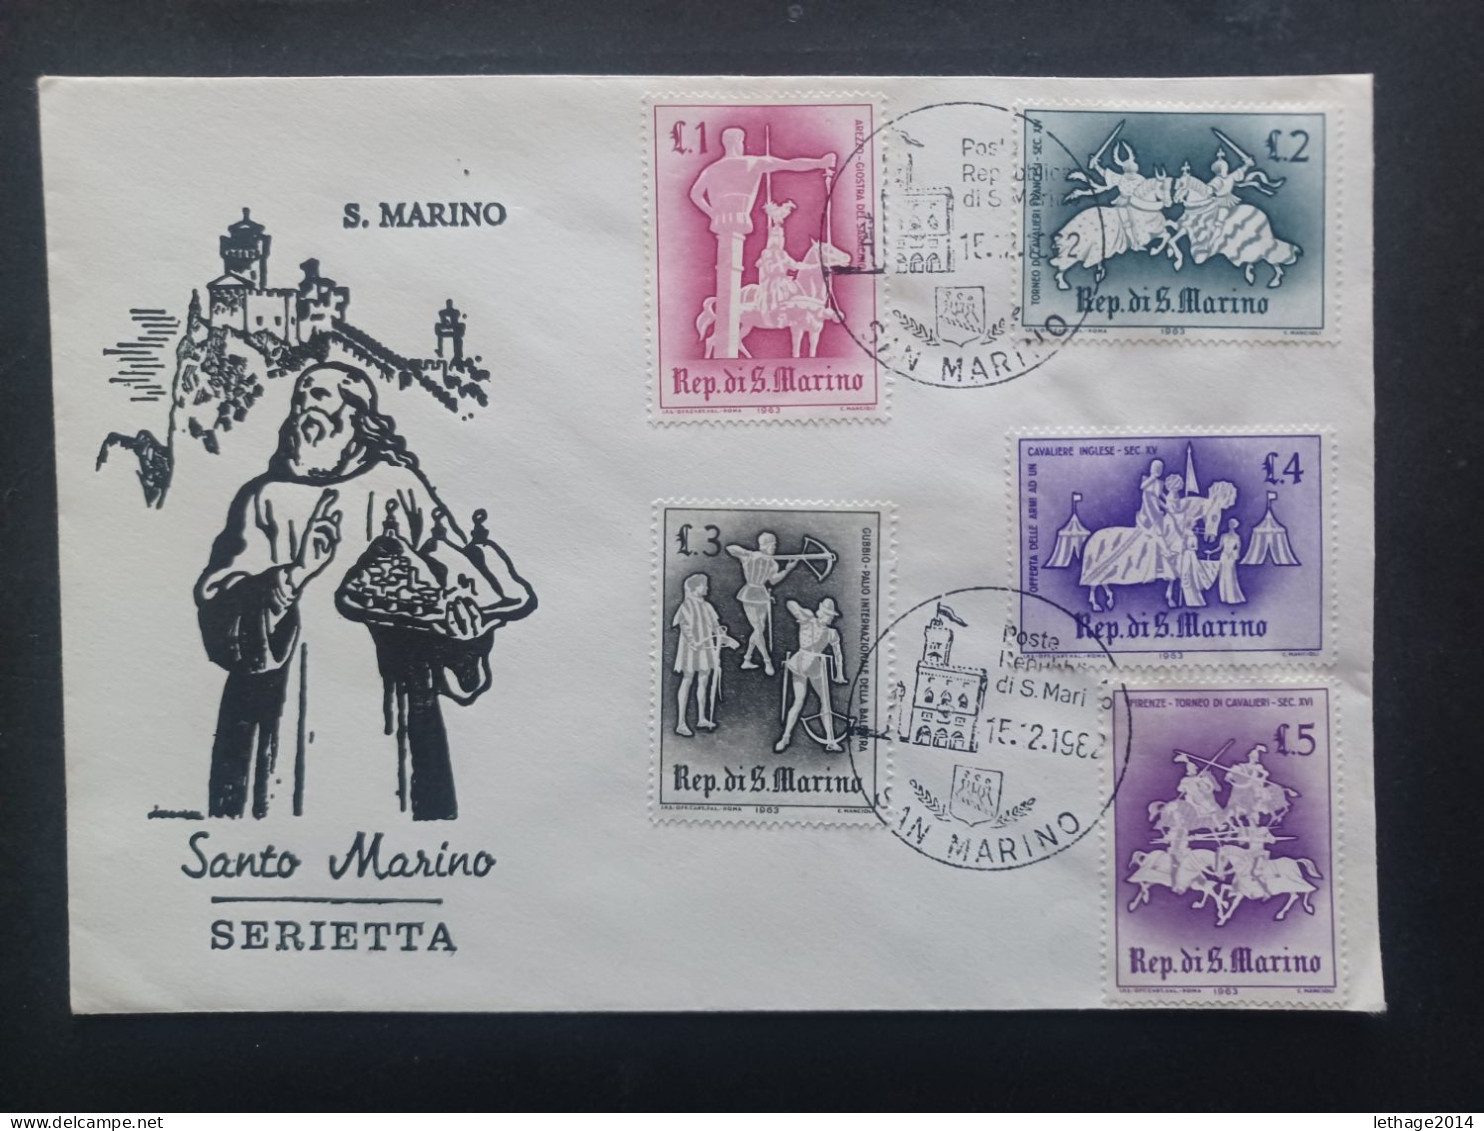 SAN MARINO FIRST DAY COVER 1963 GIOSTRE E TORNEI - Lettres & Documents